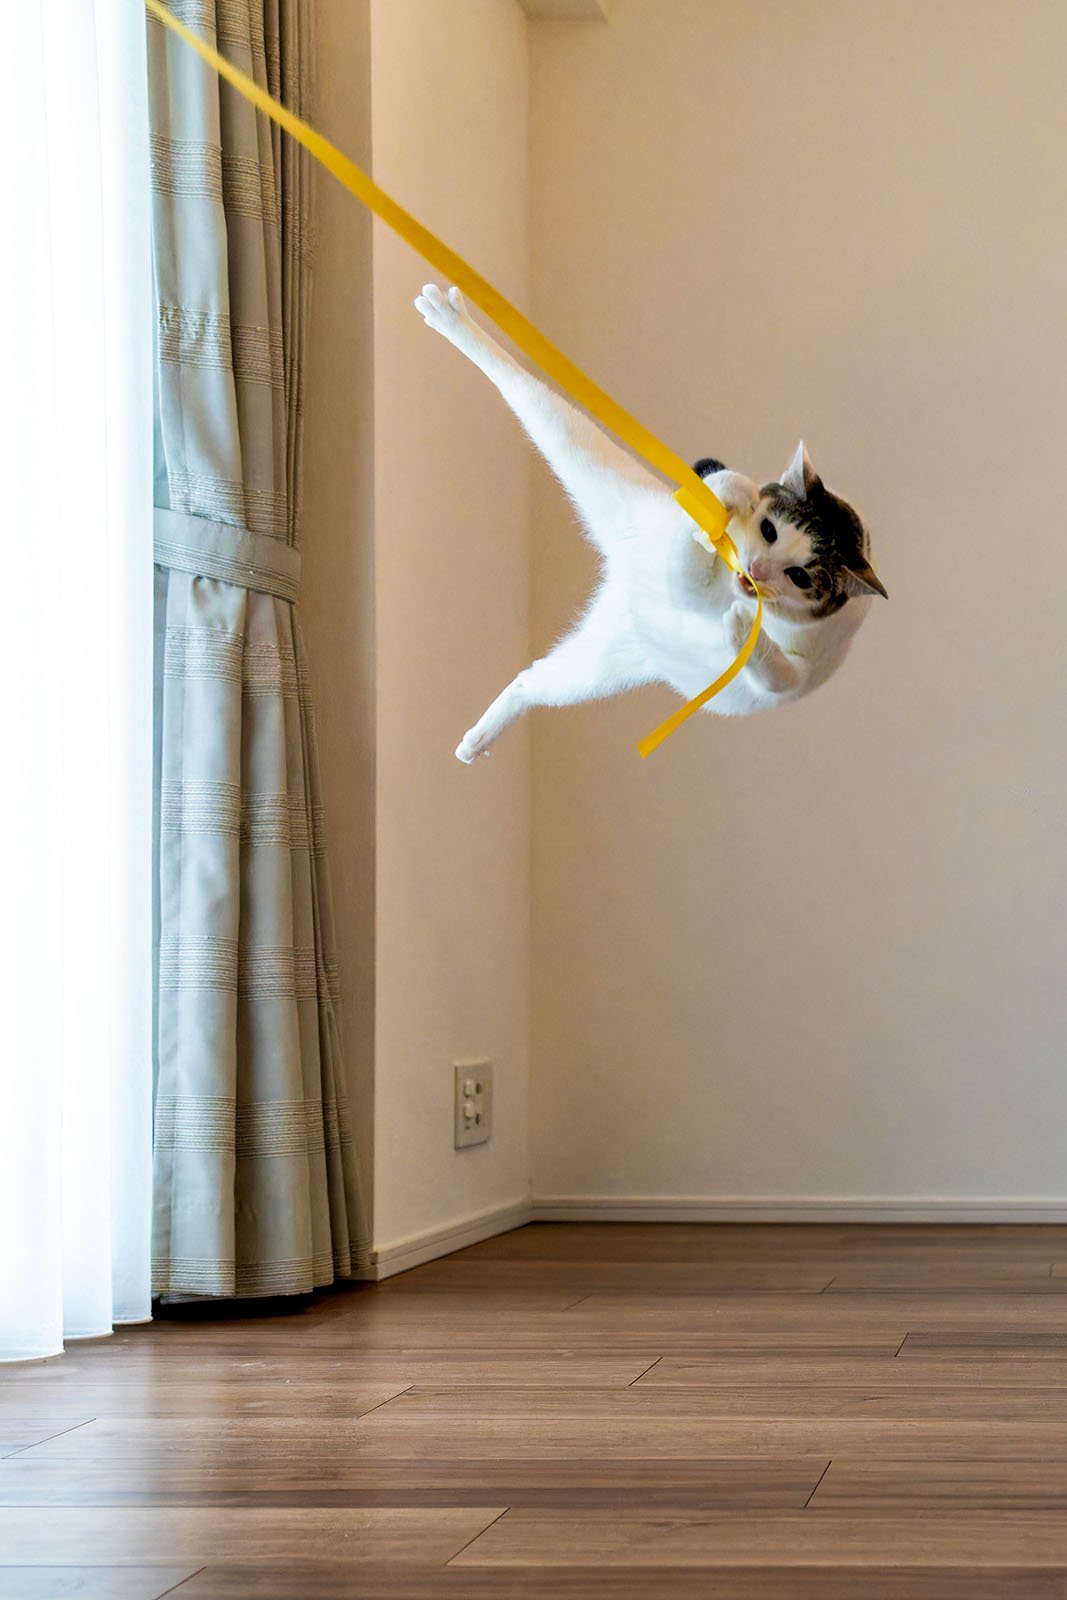 A cat is playfully dangling in mid-air while gripping a long yellow ribbon with its mouth. The cat's body is fully stretched out, and it appears to be indoors, near a window with curtains. The floor has a wood finish, and the room looks minimalistic.